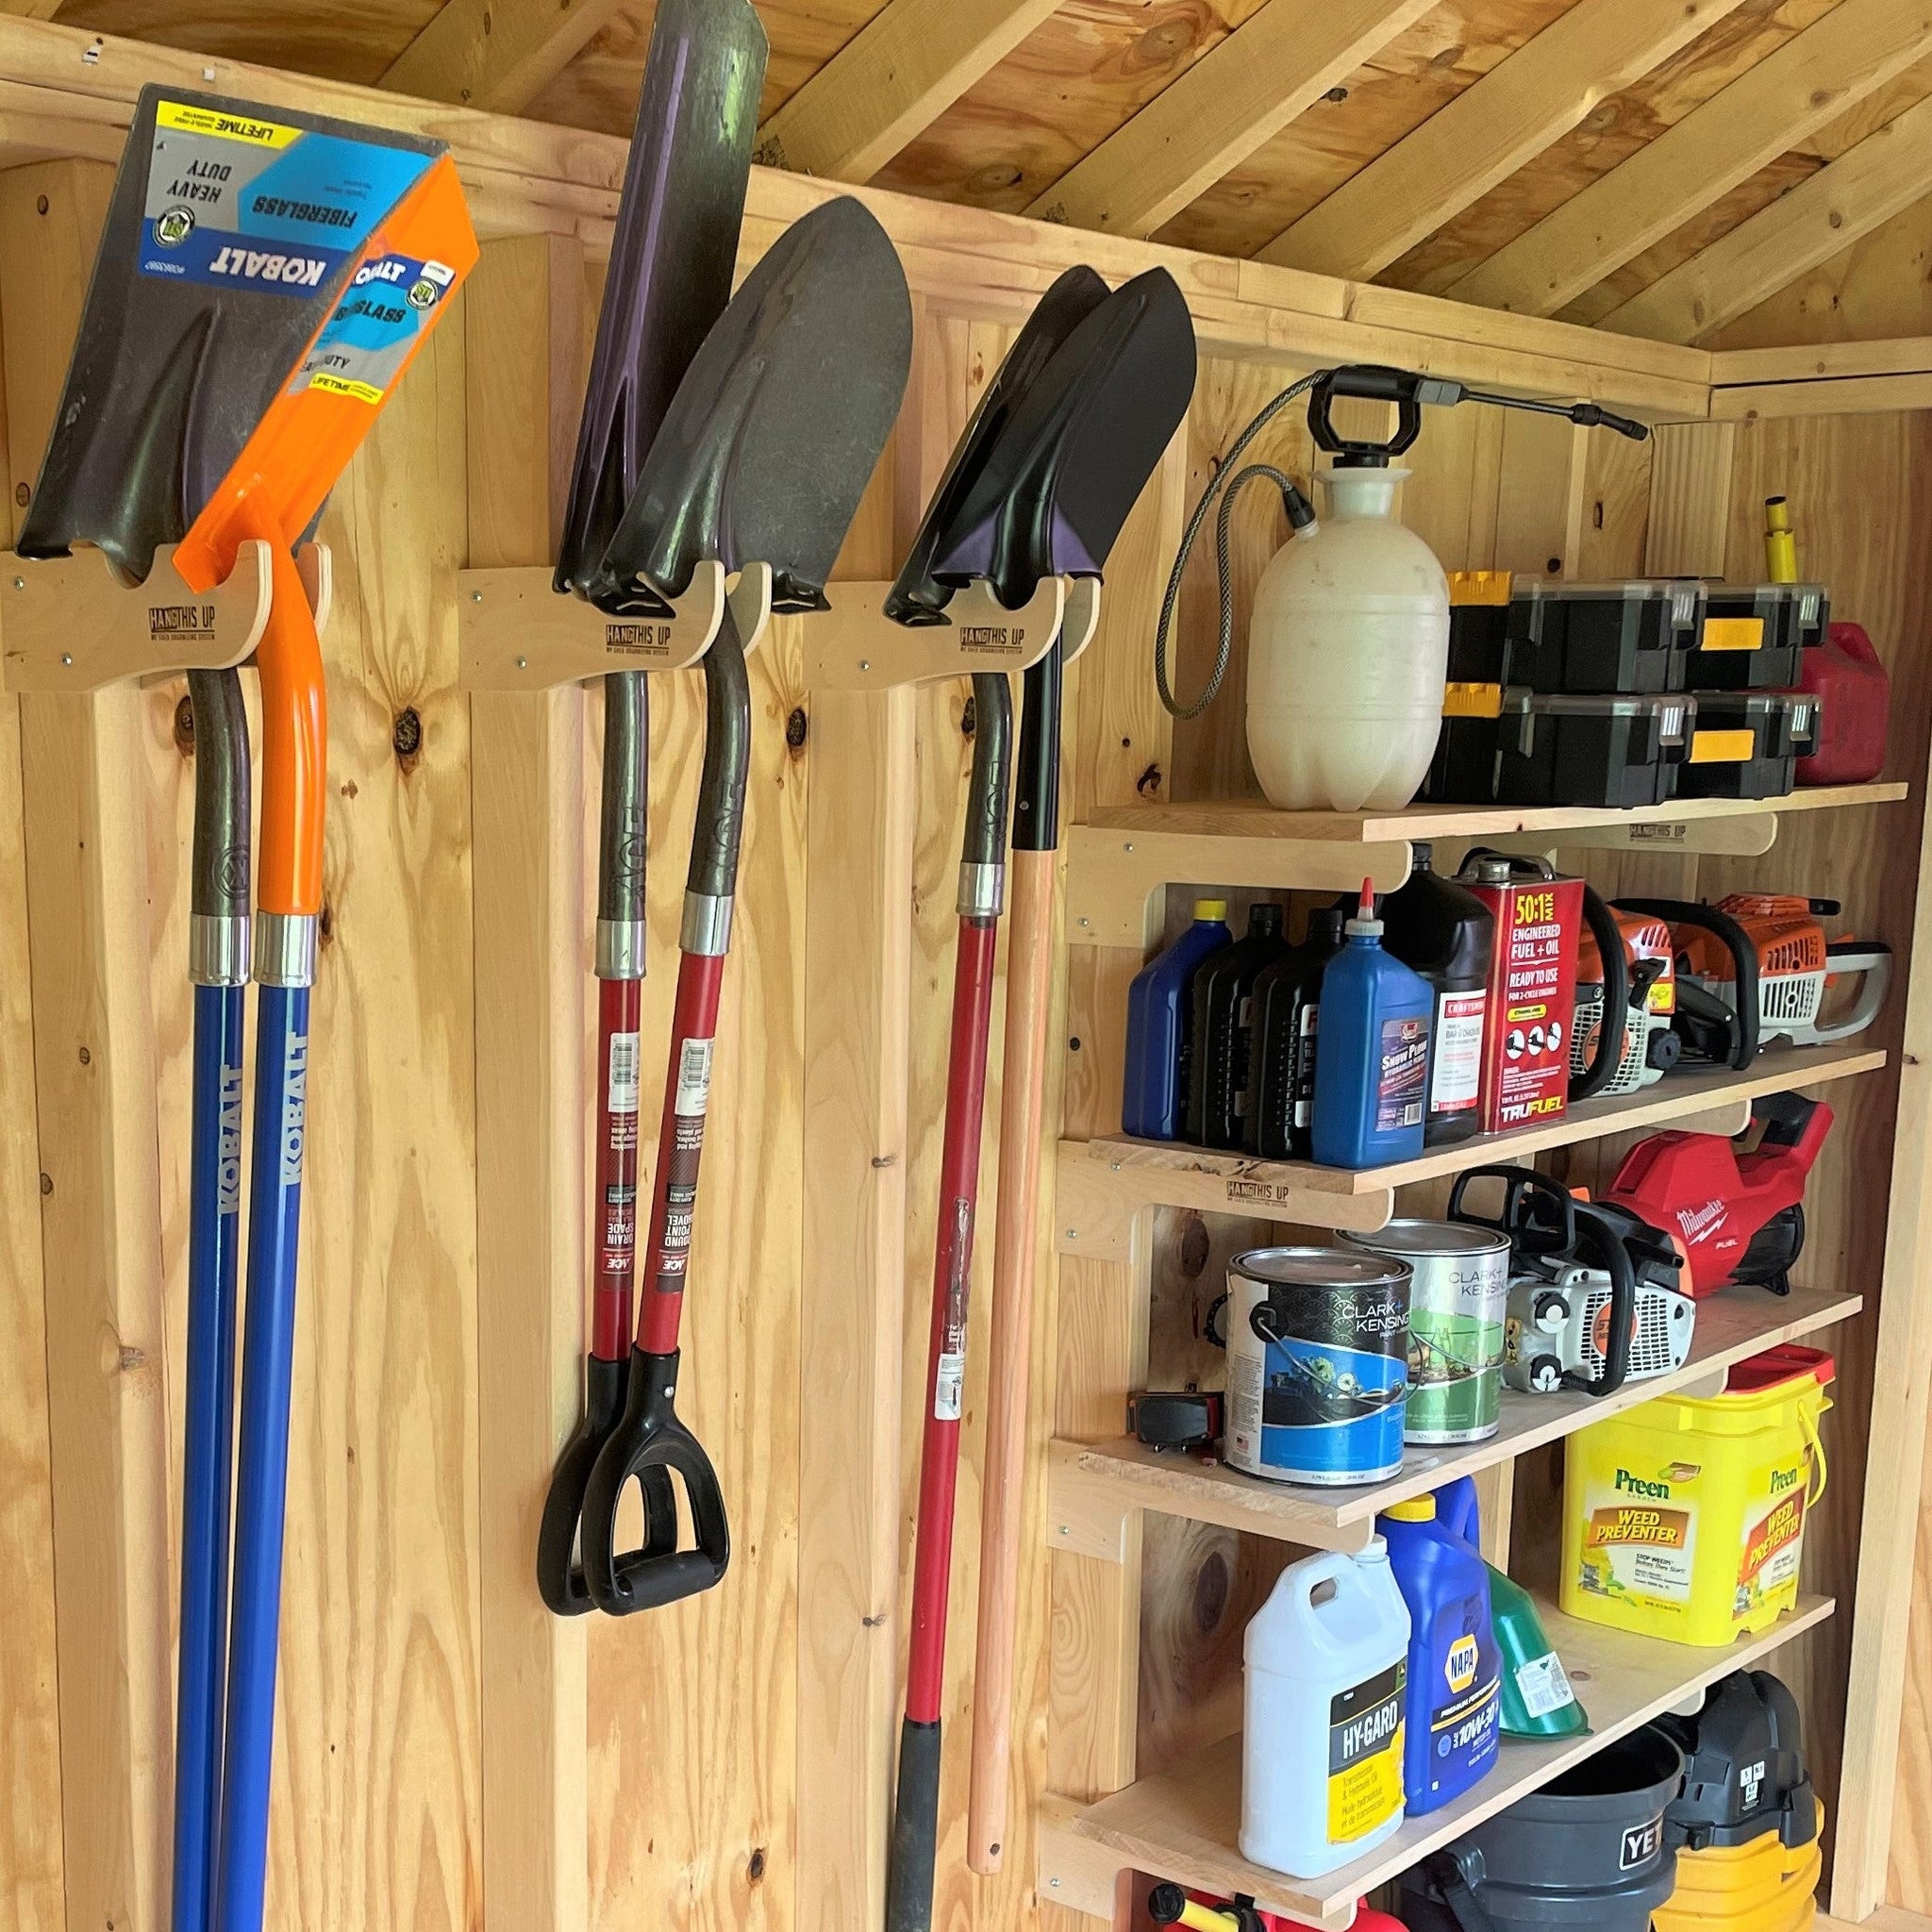 A neatly organized shed with a shelf holding tools and other items. Utilize shed organizer kit, shelf brackets, and yard tool hooks for efficient storage.